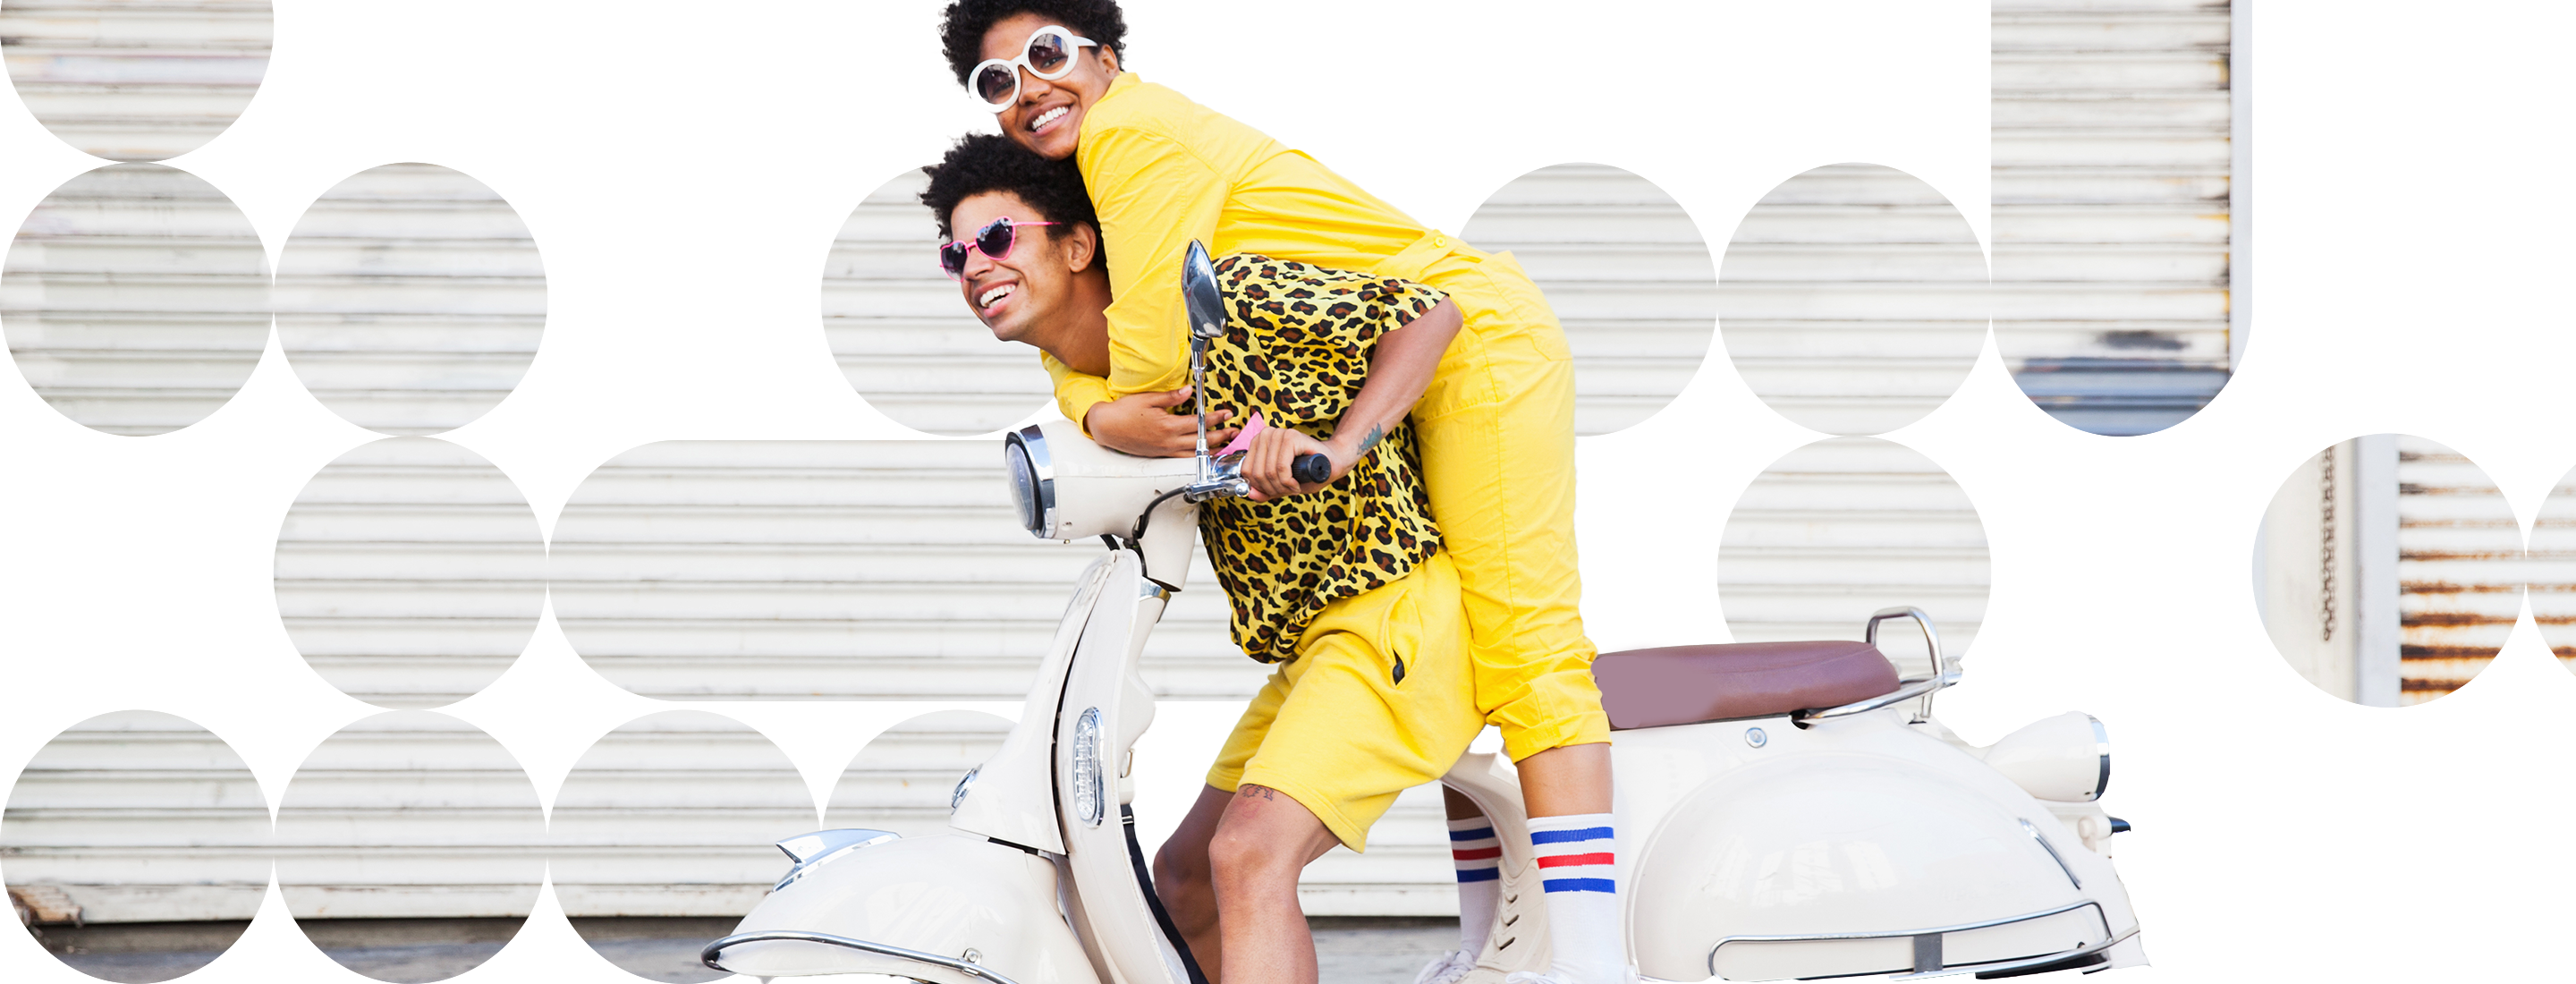 Two people, both dressed in yellow and wearing sunglasses, riding a white motor scooter, against a background of geometric shapes.